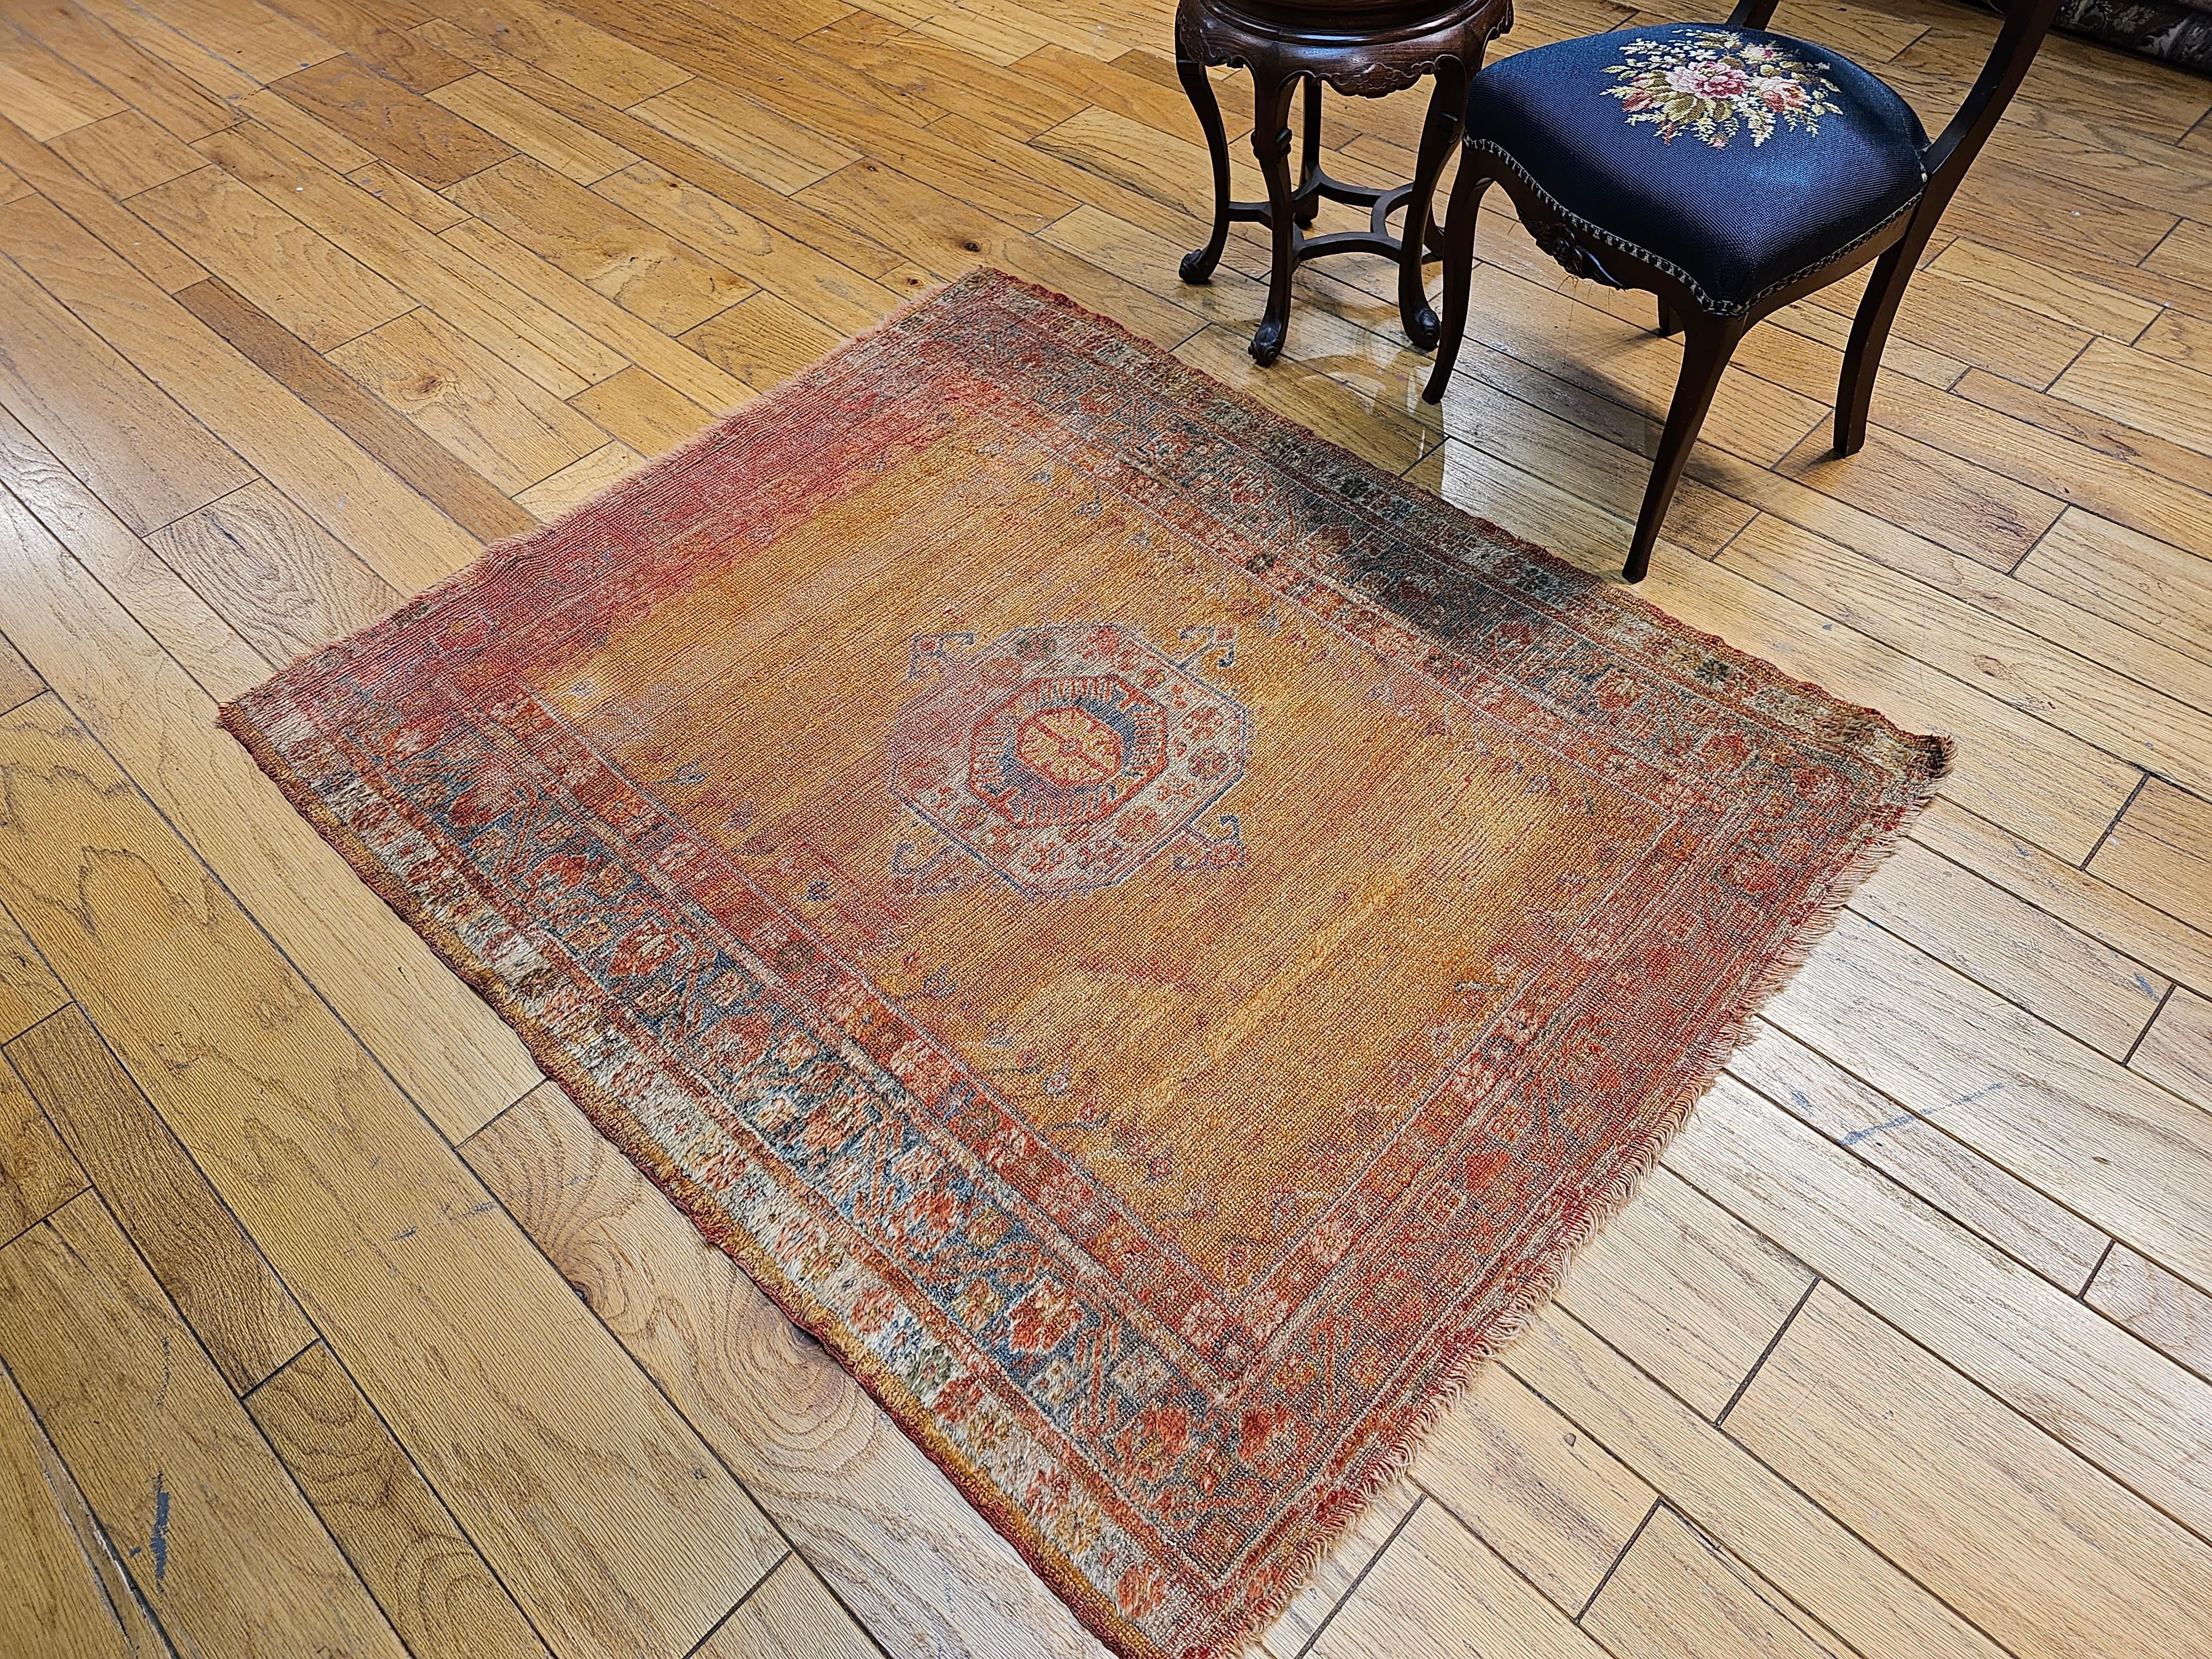 Late 19th Century Turkish Oushak Area Rug in Mamluk Pattern in Saffron, Teal For Sale 9